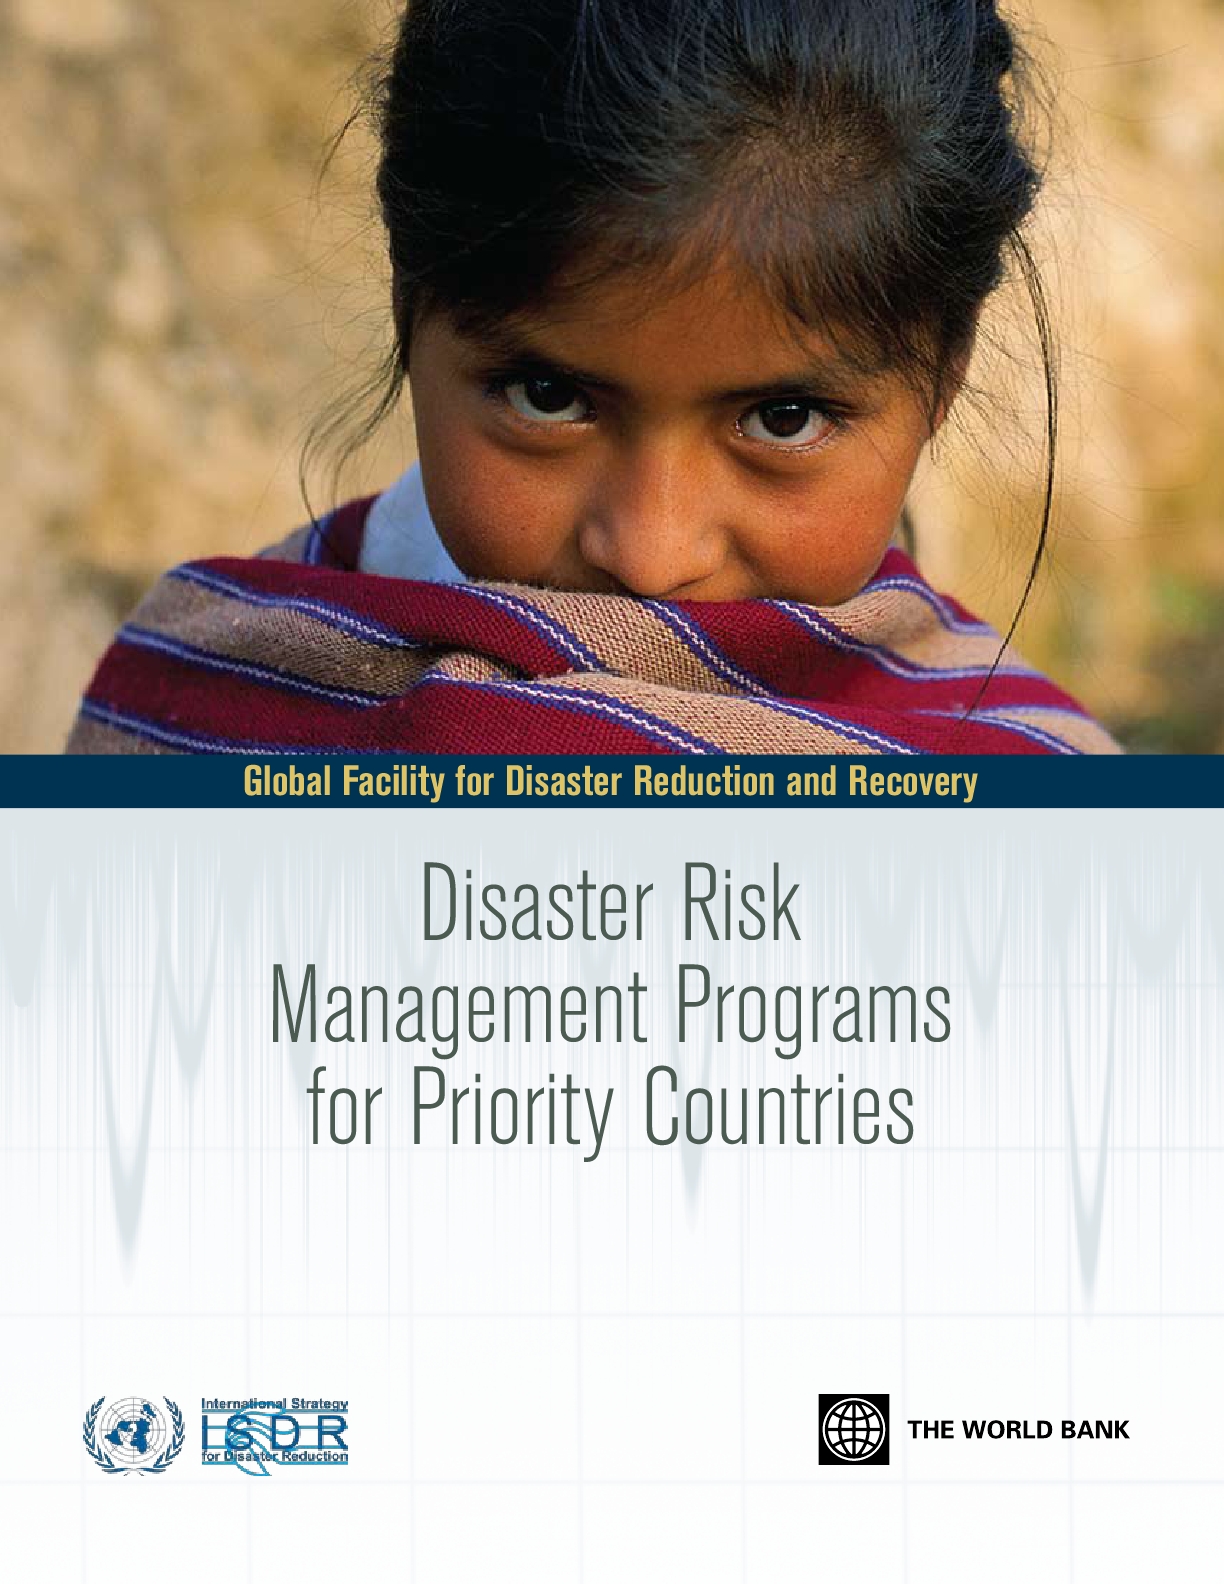 <p style="margin-bottom: 15px;">This is the 2nd edition of the Disaster Risk Management Program for Priority Countries, originally published by GFDRR&nbsp;in 2009. It now includes the country programs missing in the first edition (Burkina Faso, Malawi, Mali, Senegal, and Philippines 1) as well as an update of the DRM Country Program for Haiti (to take into account the impact of the January 2010 earthquake), Panama, Guatemala, Ecuador, Colombia, Costa Rica.</p><p style="margin-bottom: 15px;">As indicated in the previous edition, the presented programs are indicative; as the detailed planning and implementation phases have started, further dialogue with the Governments and other partners has refined the agendas and prioritized interventions.</p><p style="margin-bottom: 15px;">Source: <a href="https://www.gfdrr.org/drmprogramsforprioritycountries">GFDRR</a></p>